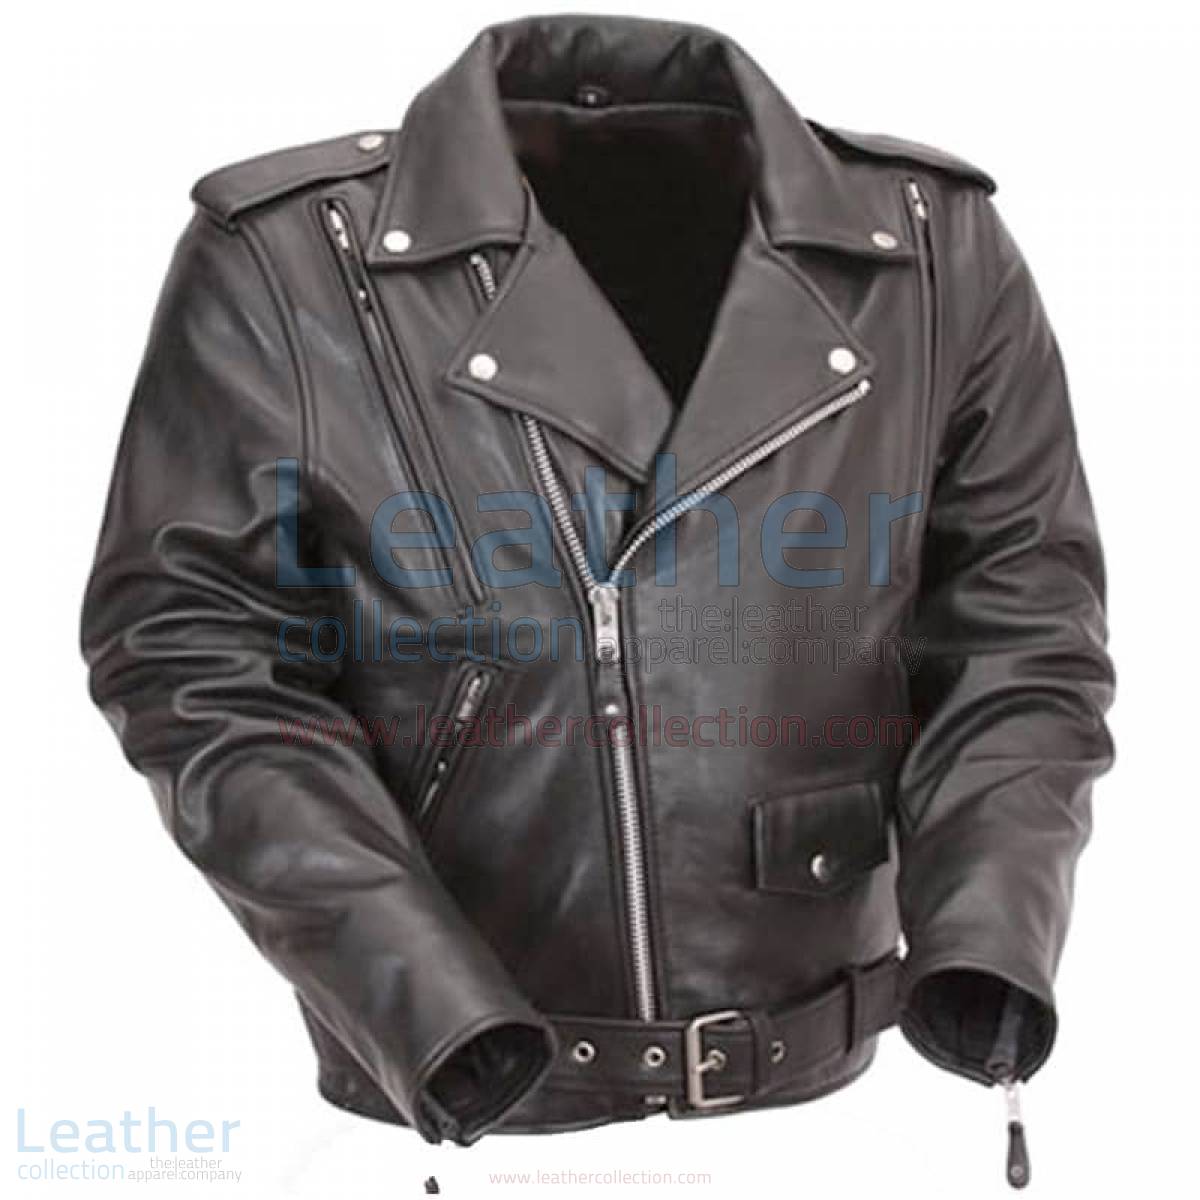 Black Leather Motorcycle Jacket with Exclusive Built-in Back Support –  Jacket